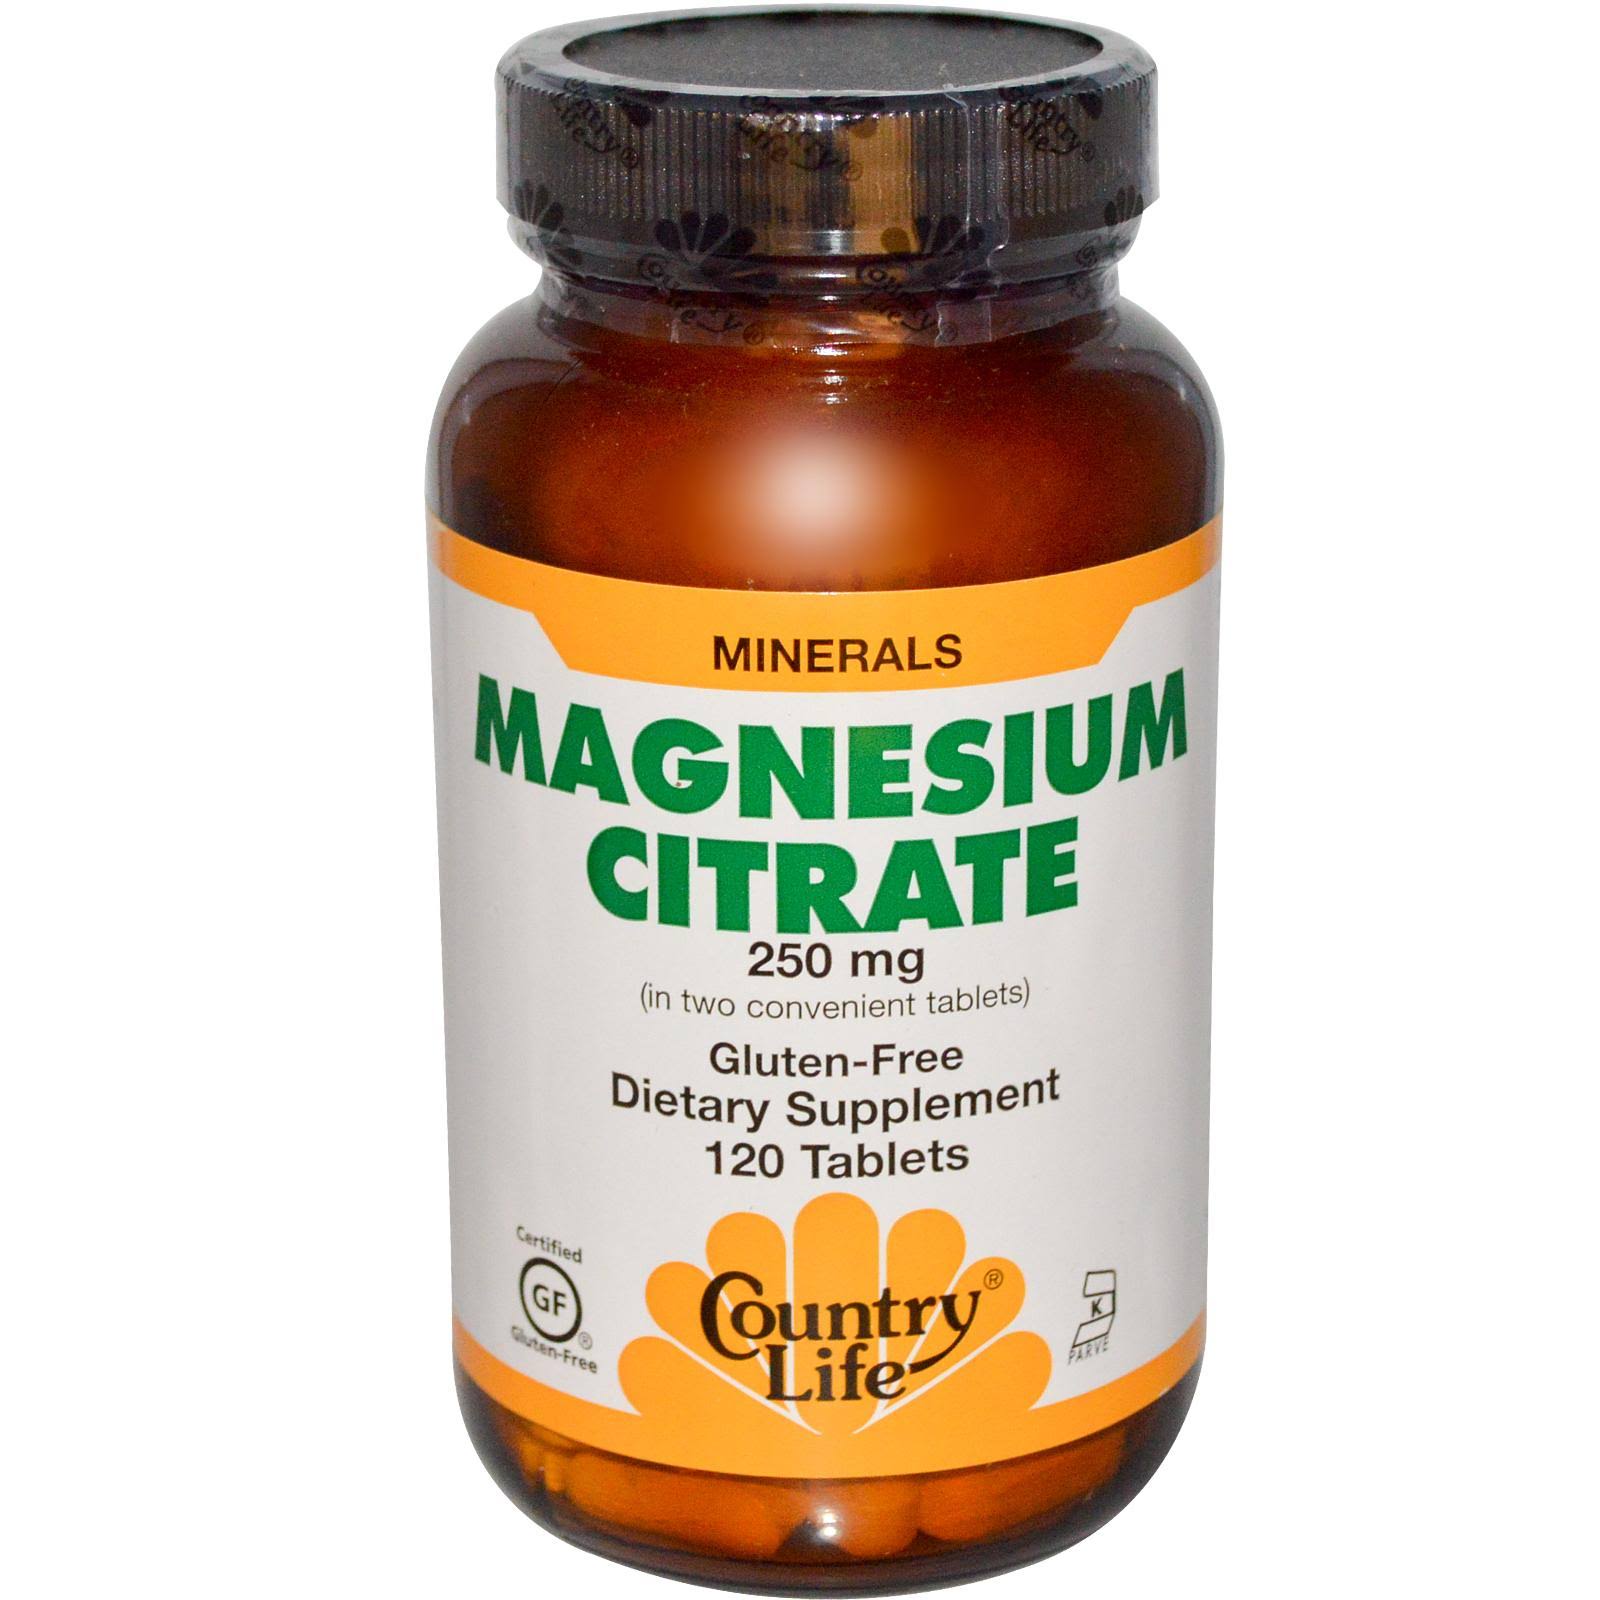 Country Life - Magnesium Citrate, 250 MG - 120 Tablets